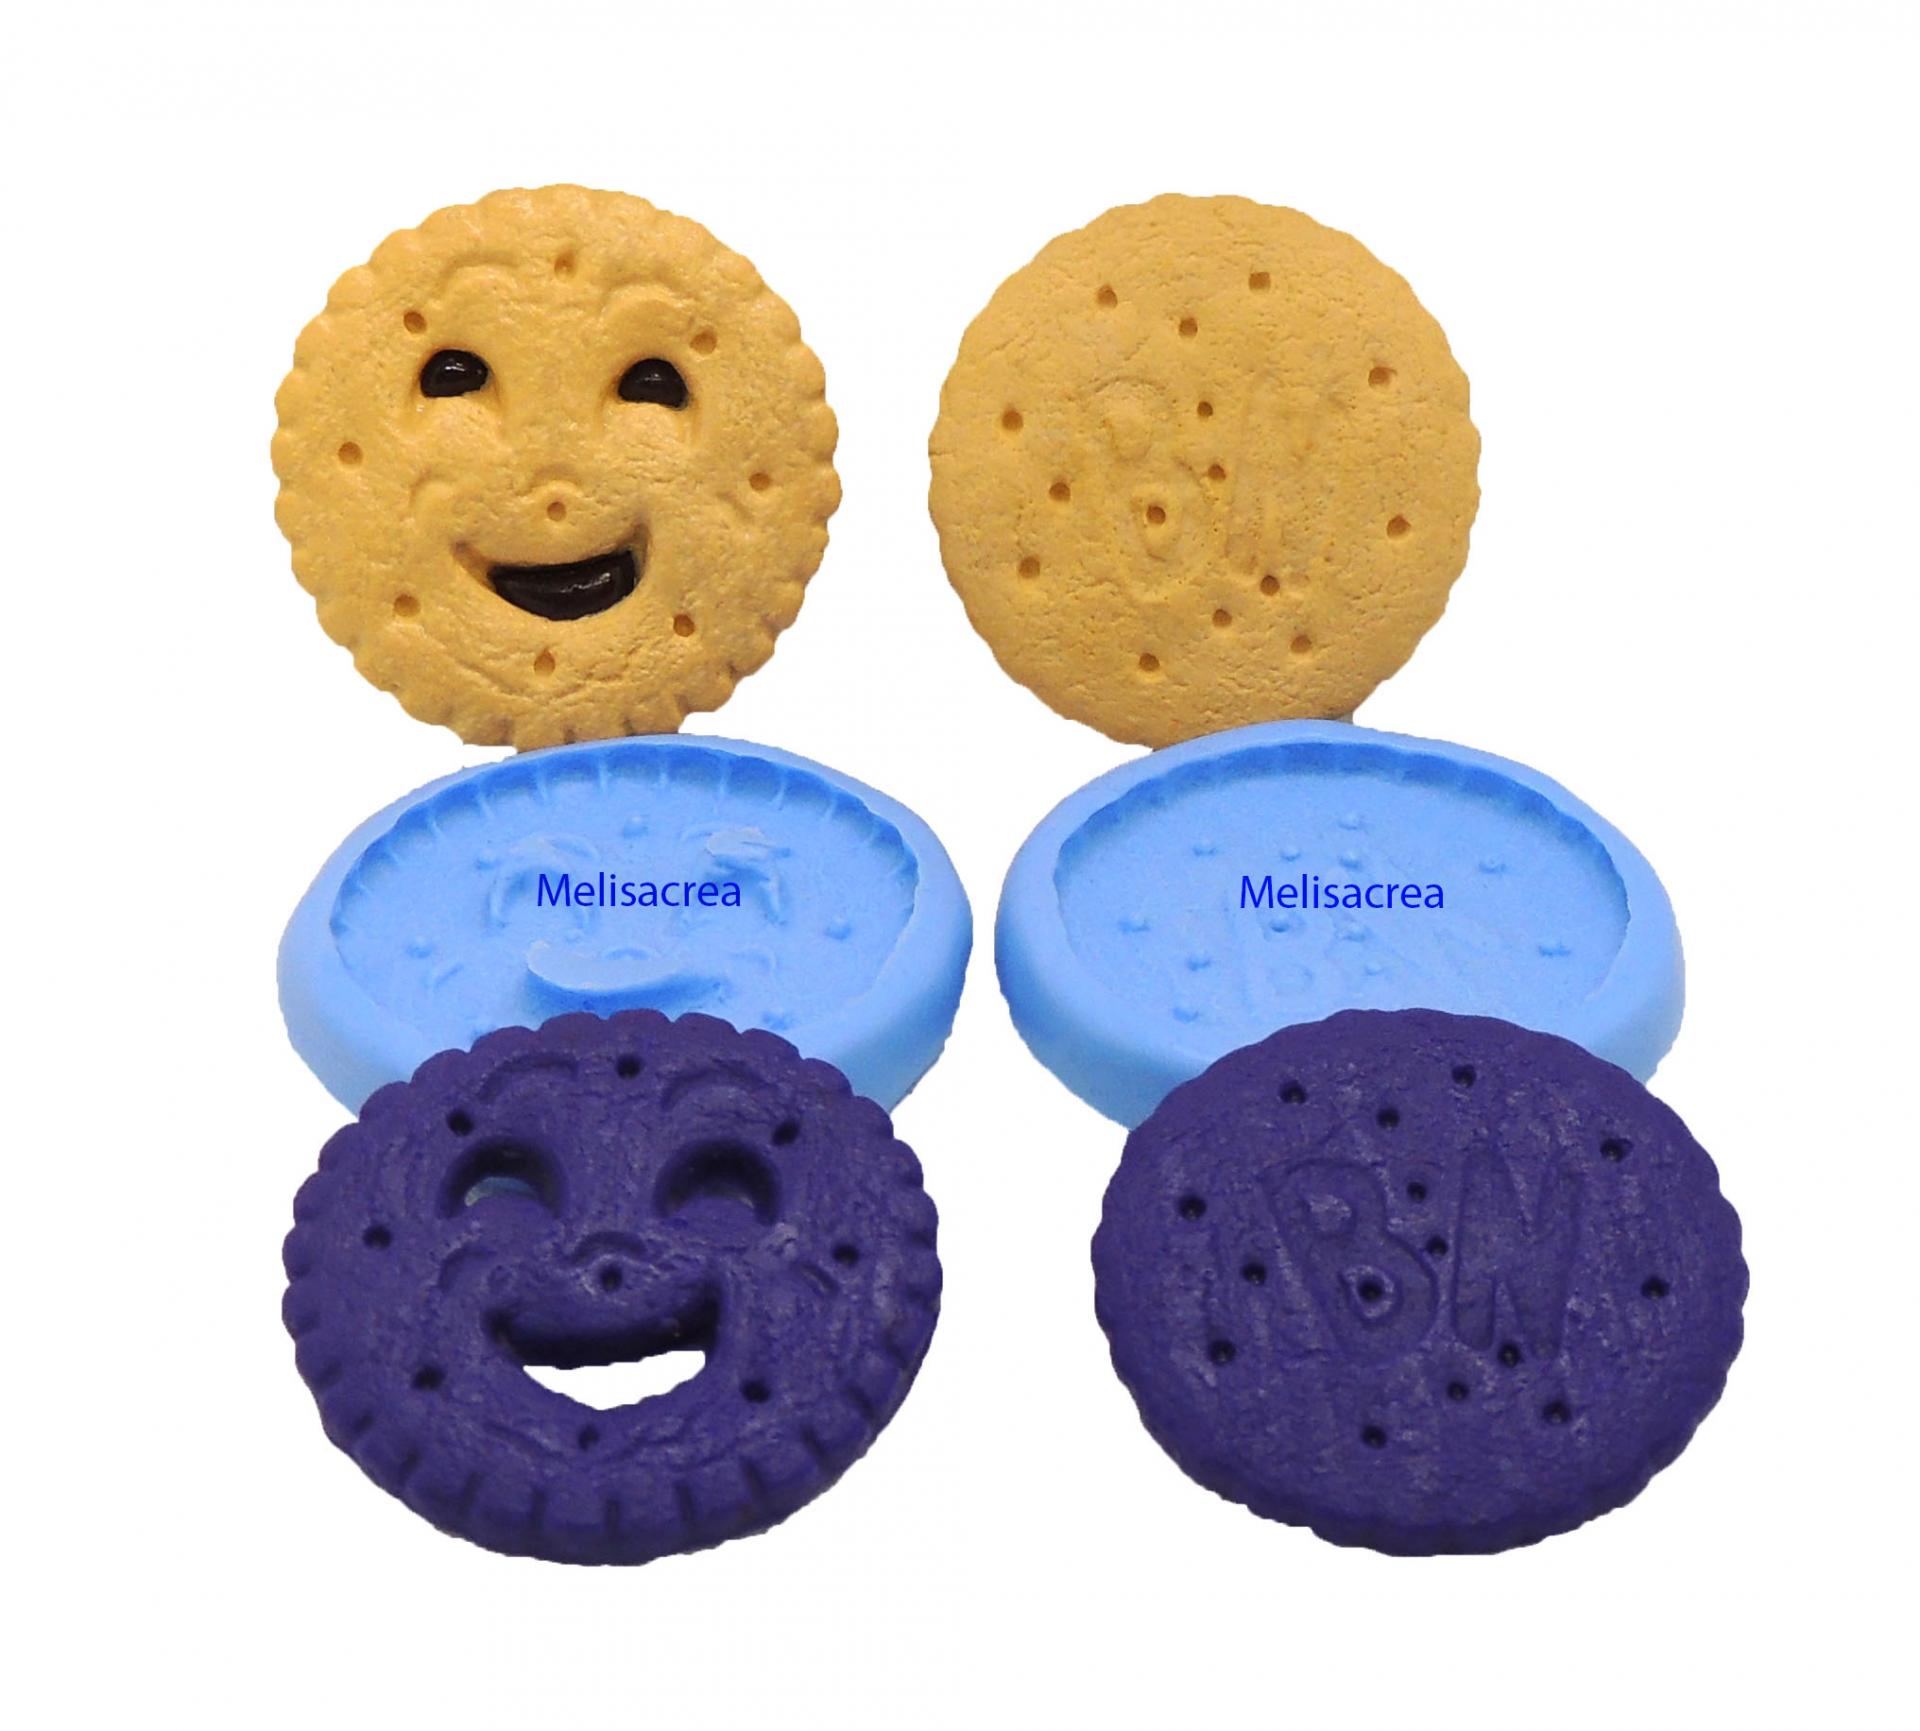 Moule en silicone Biscuit Face choco BN, yeux triangle - 3,9 cm